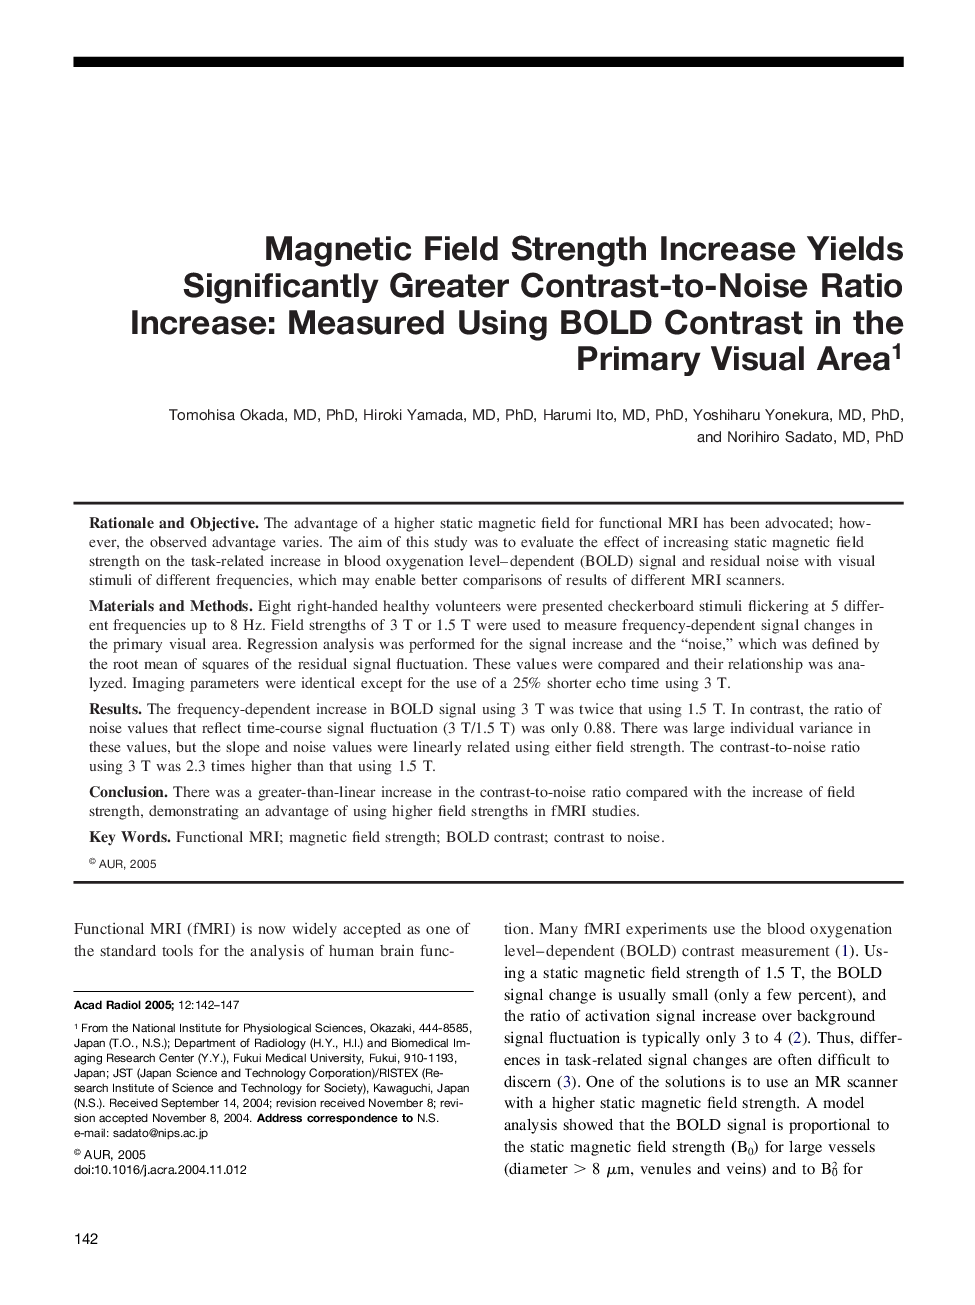 Magnetic field strength increase yields significantly greater contrast-to-noise ratio increase: Measured using BOLD contrast in the primary visual area1